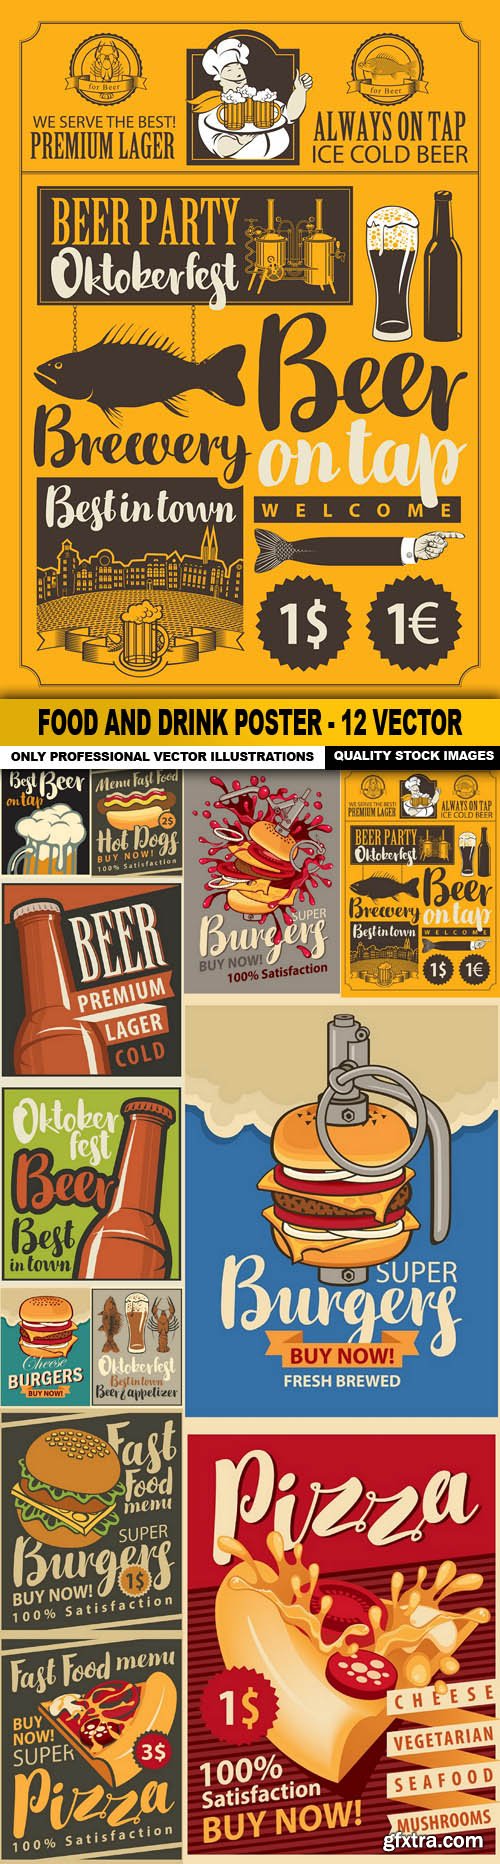 Food And Drink Poster - 12 Vector